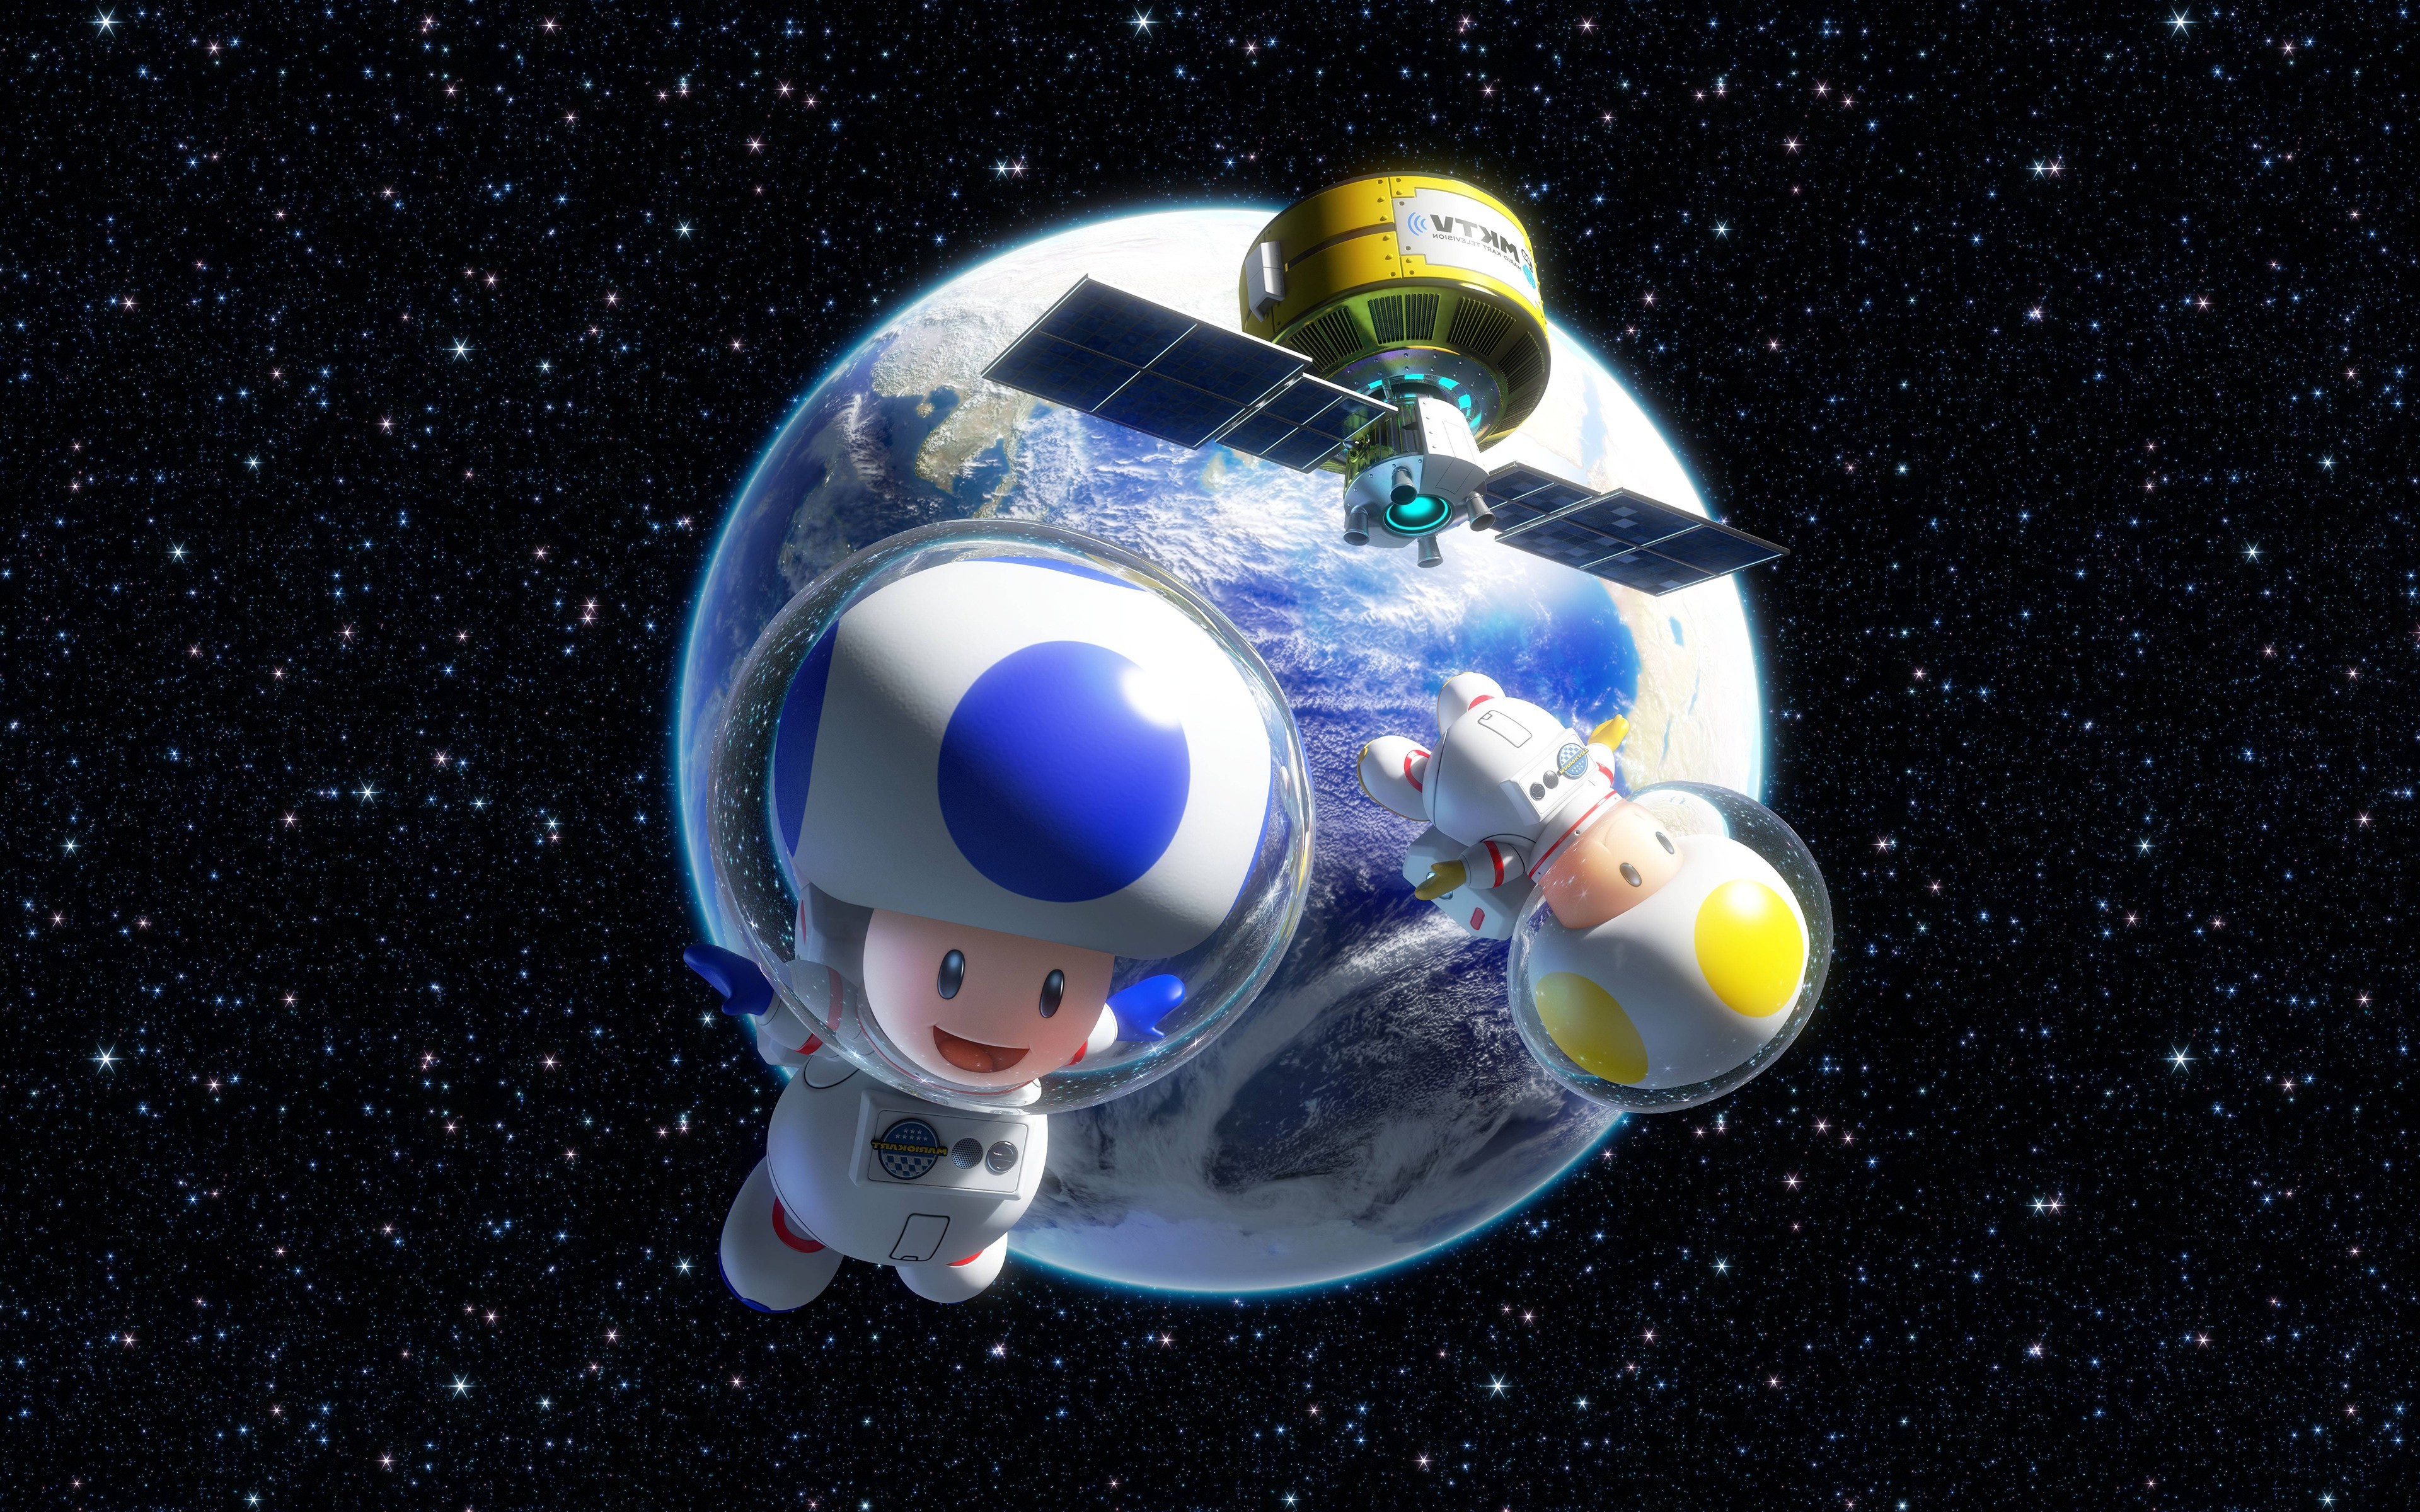 Toad Character Space Video Games Mario Kart 8 Nintendo Astronaut Earth Wallpapers Hd 1854